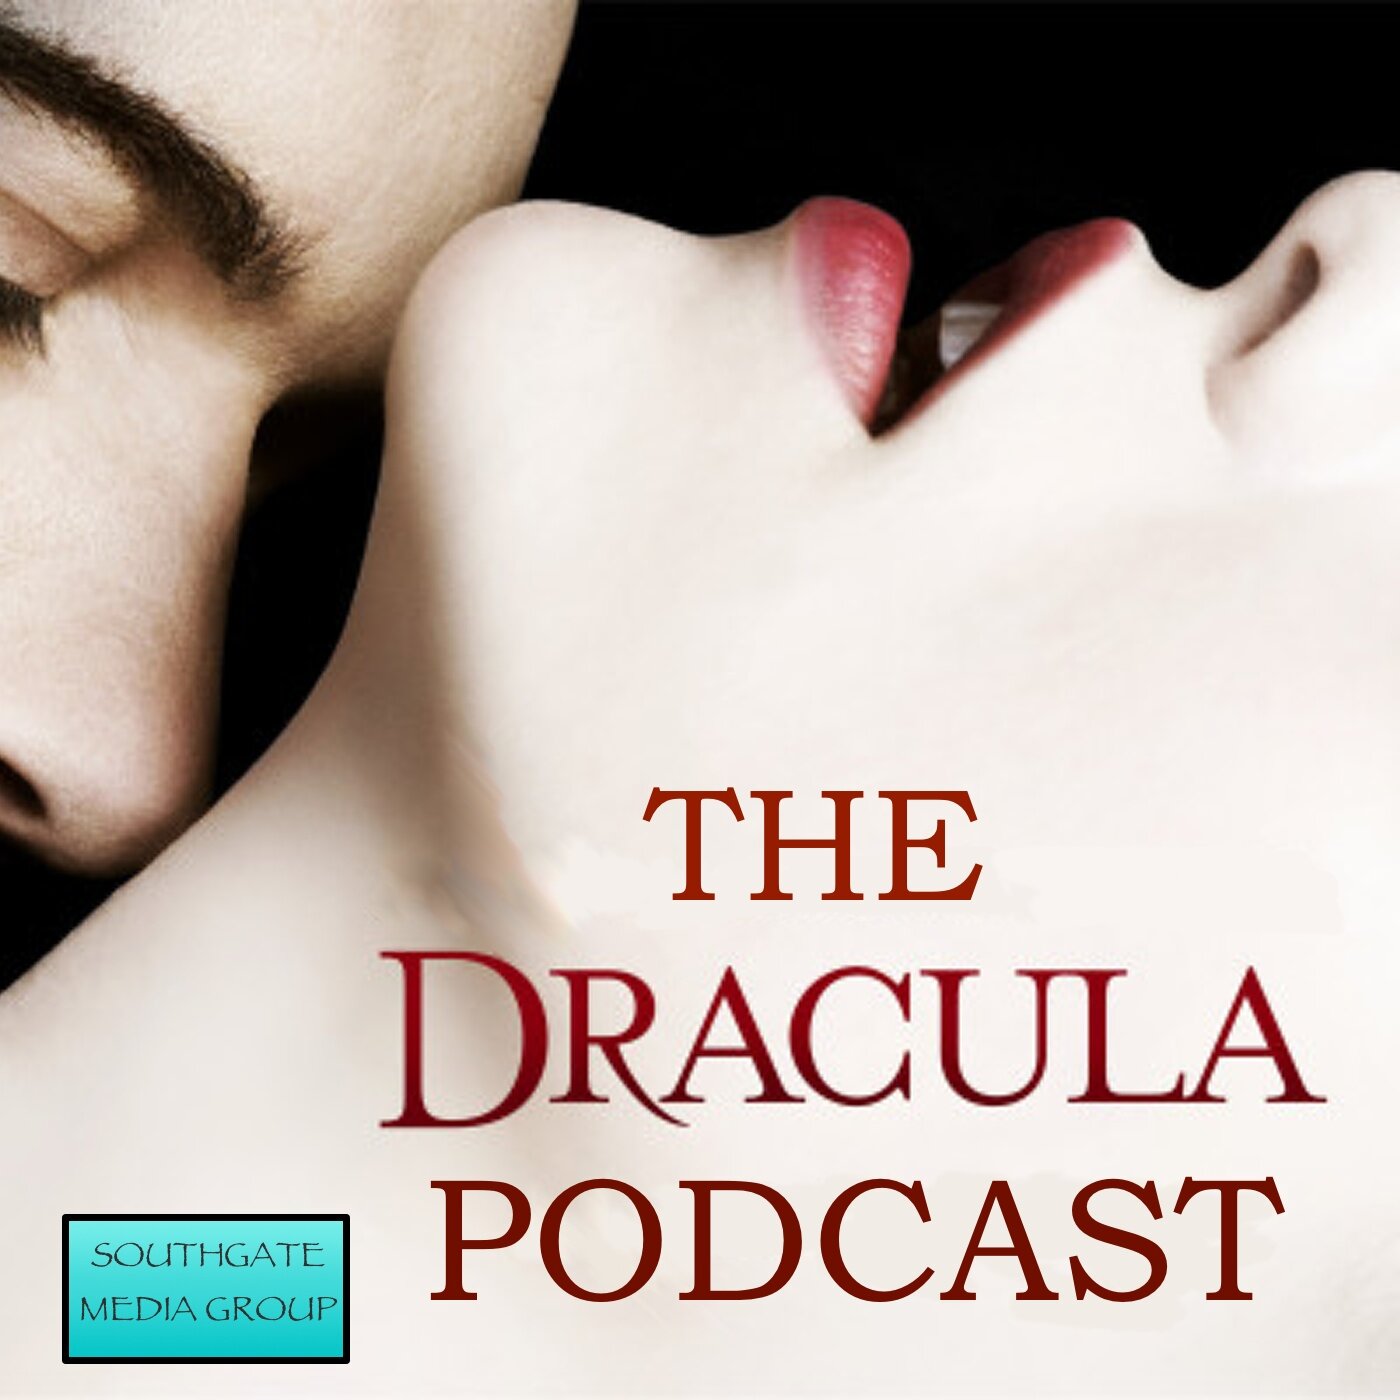 Home to the Dracula Podcast with Frank Stella